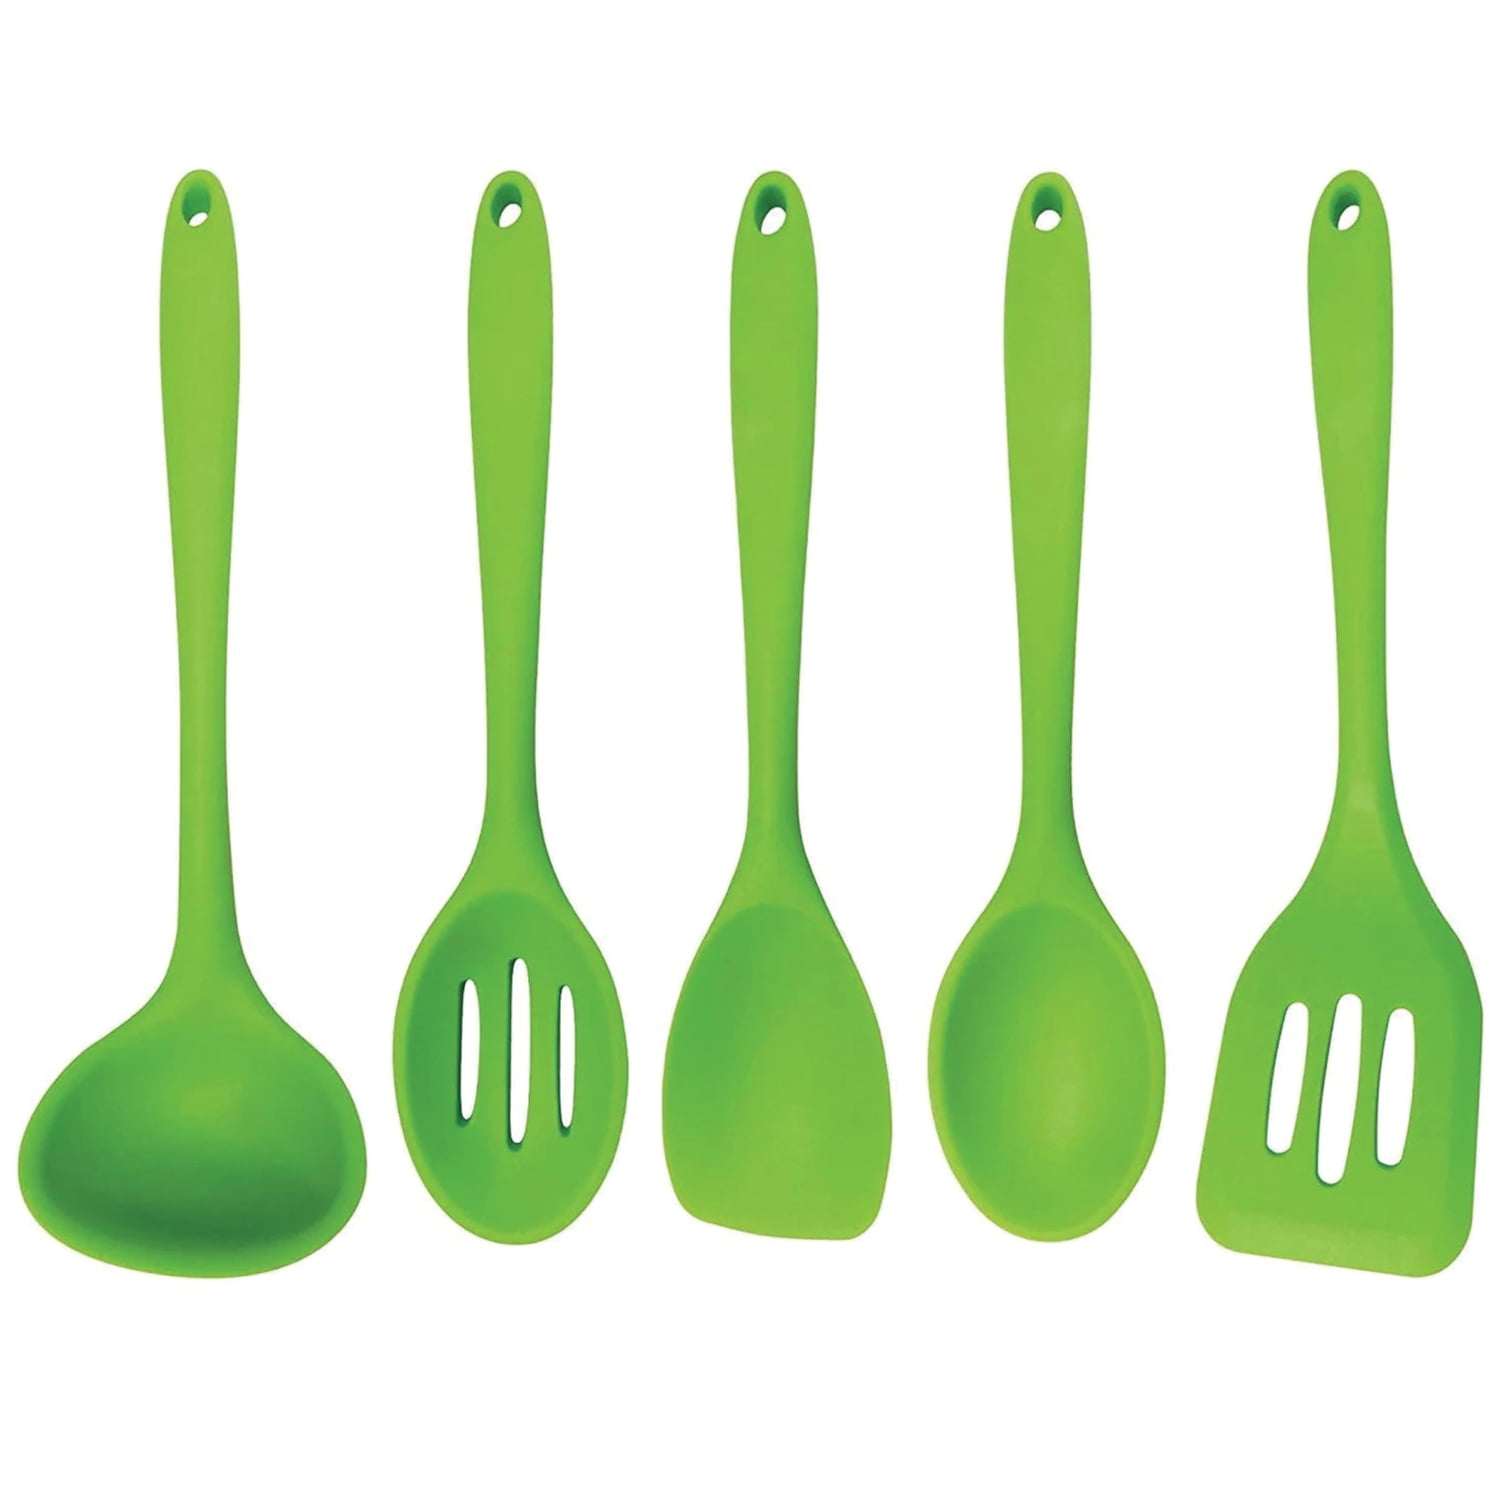 5pc Heat Resistant Green Silicone Kitchen Utensils Set Cooking Tools Kitchenware Soup Spoon Spatula Cookware Accessories Supplies Ruya Company Color